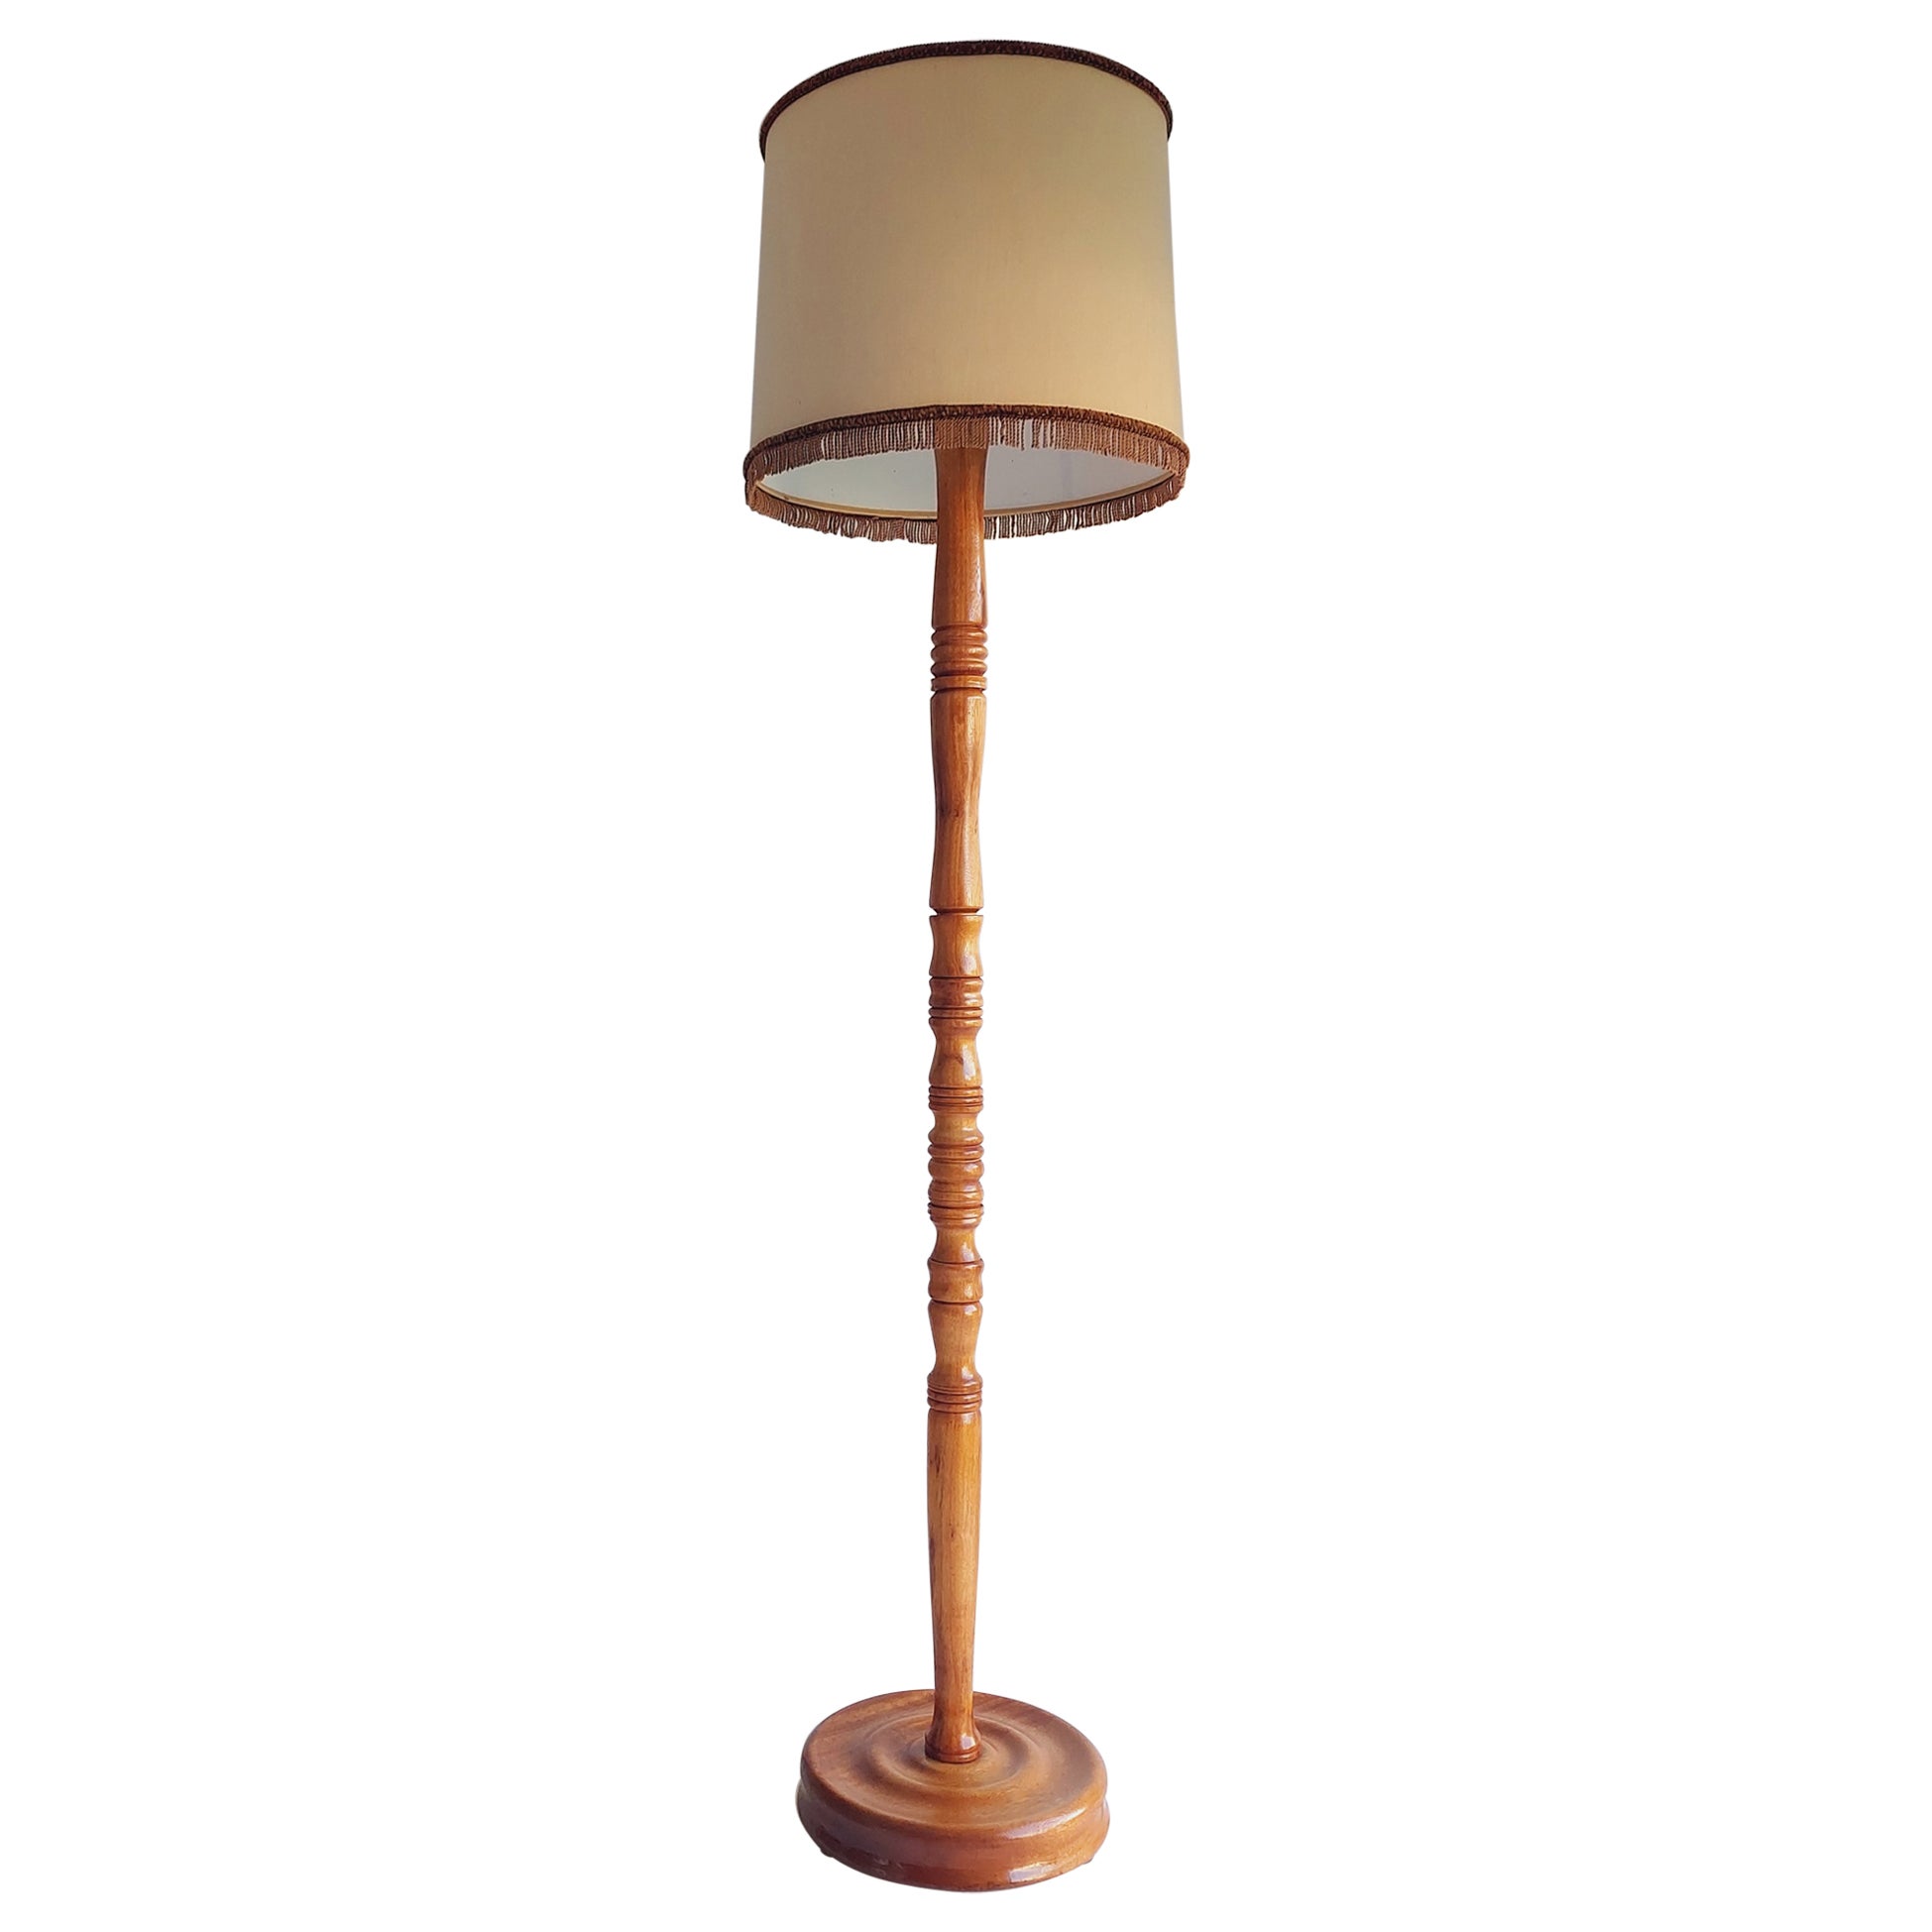 Antique Large Standard Oak turned floor lamp with lampshade, 30s